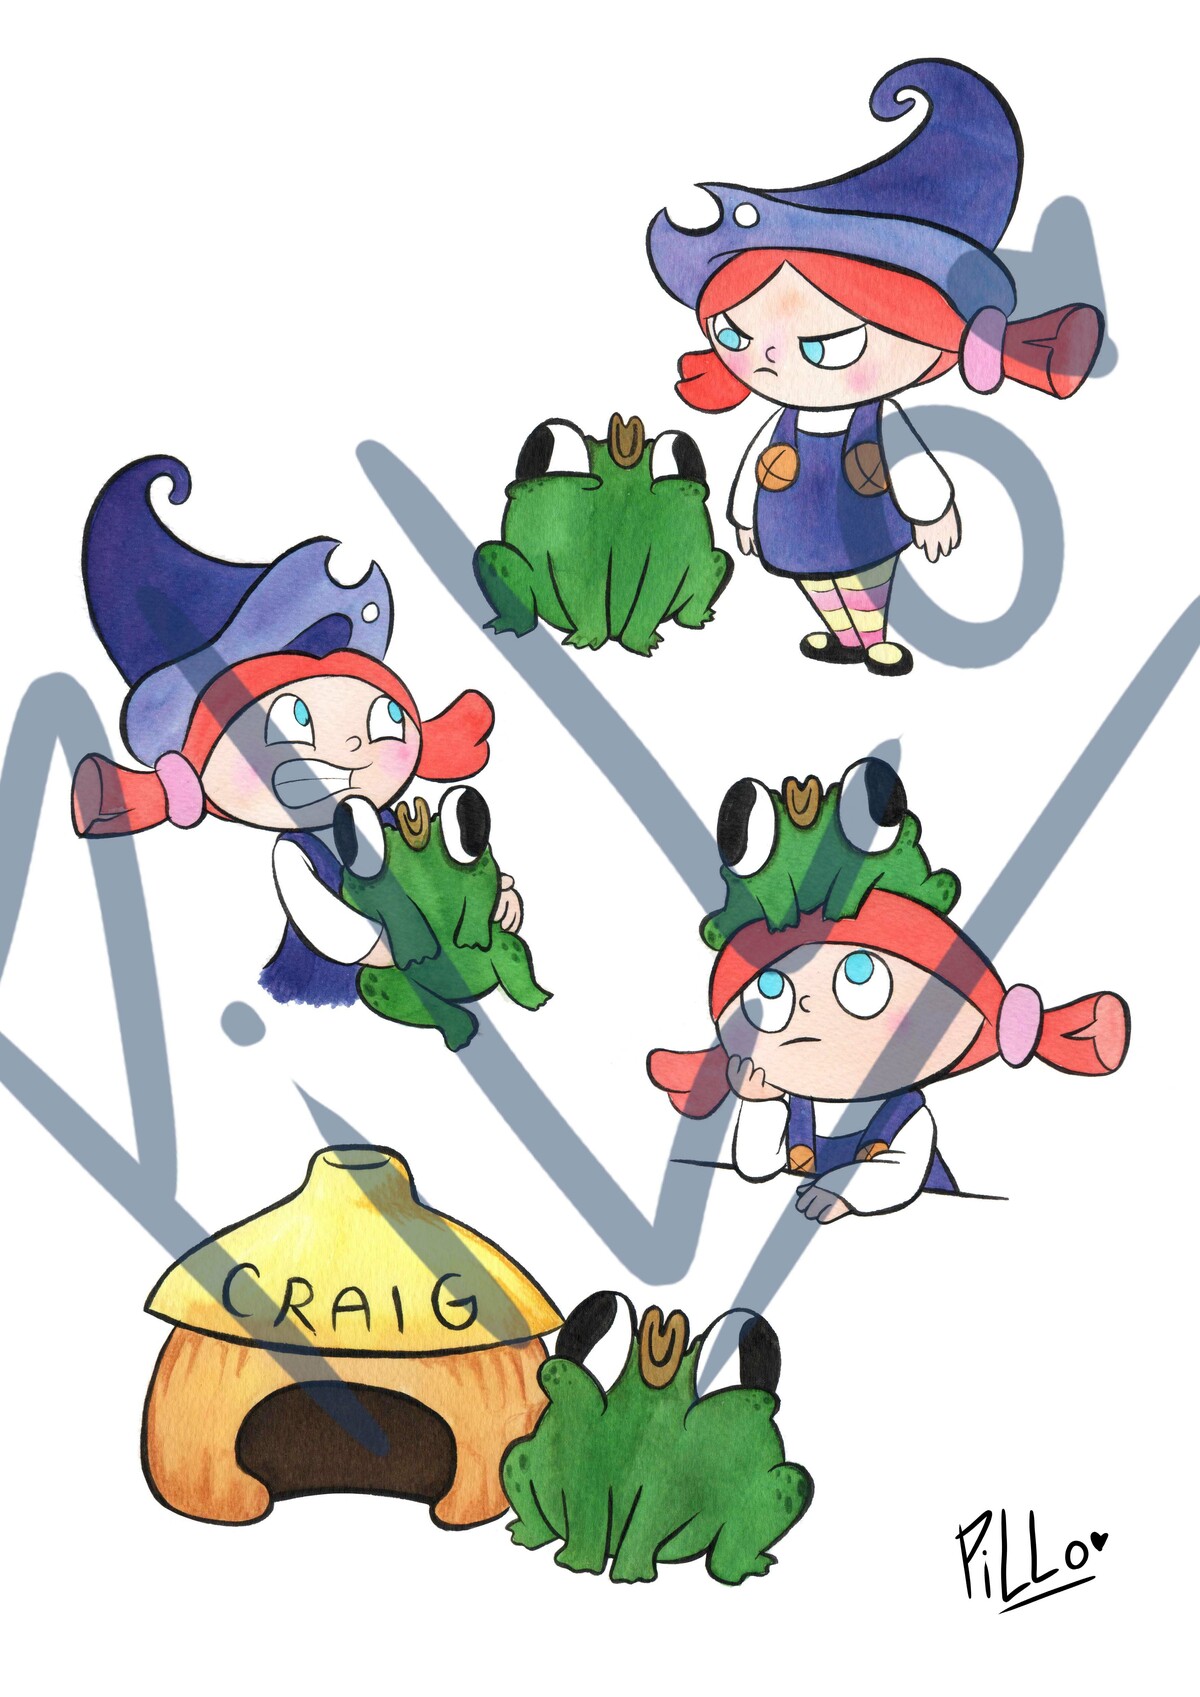 Abby and Craig - Abby is a little witch whom received Craig, a toad destined to become her familiar, from her absentee mother. While not pleased, Abby will do her best to become a full-fledged witch with what she haves, and maybe Craig will help her along the way with his friendship.